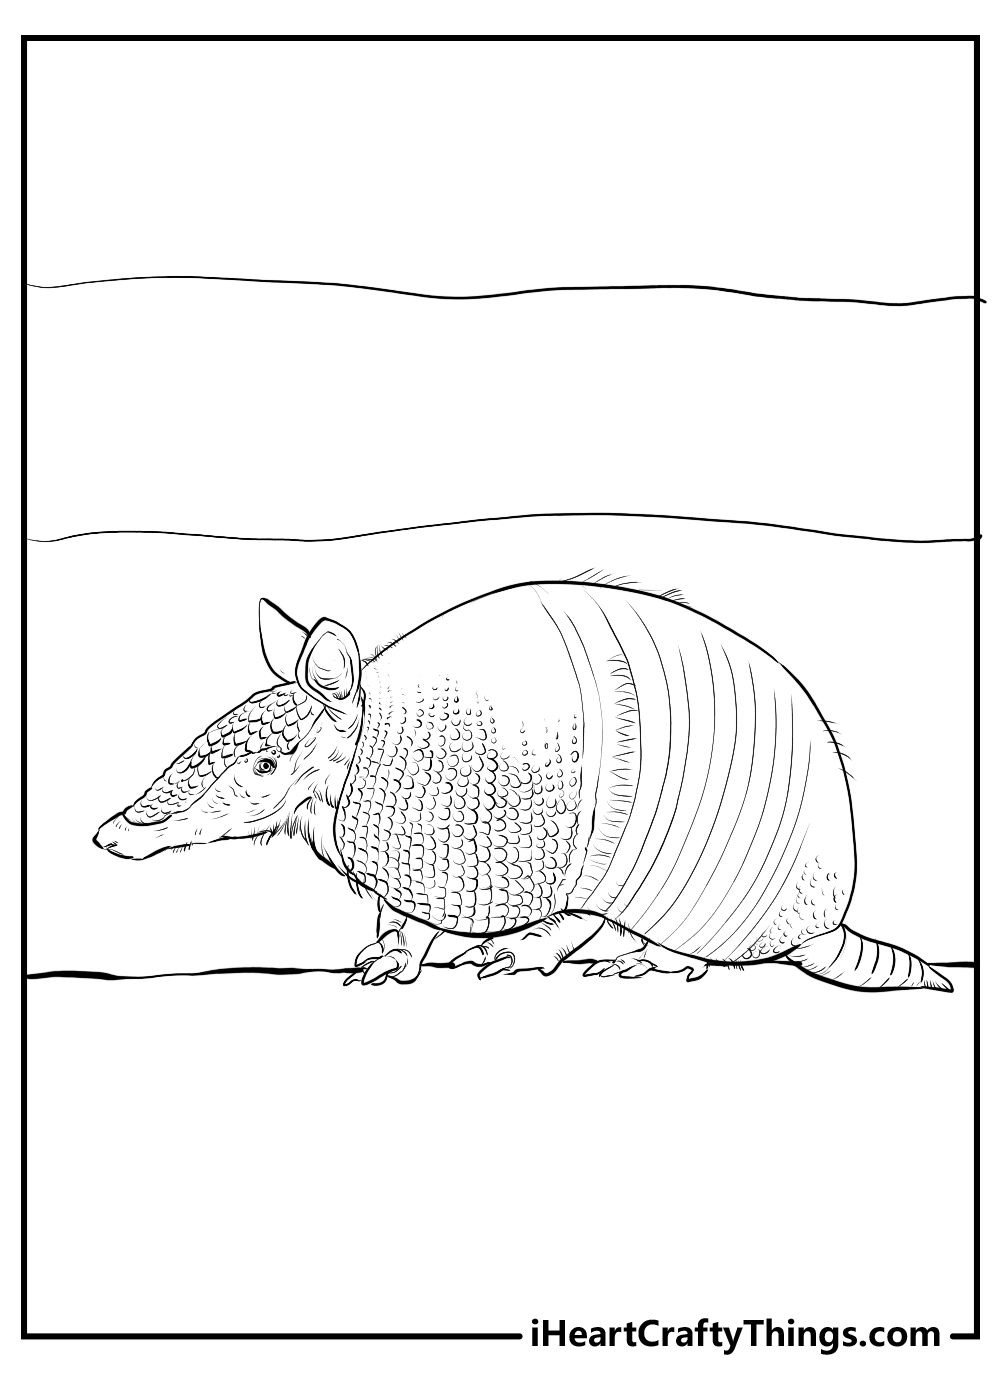 armadillo coloring pages